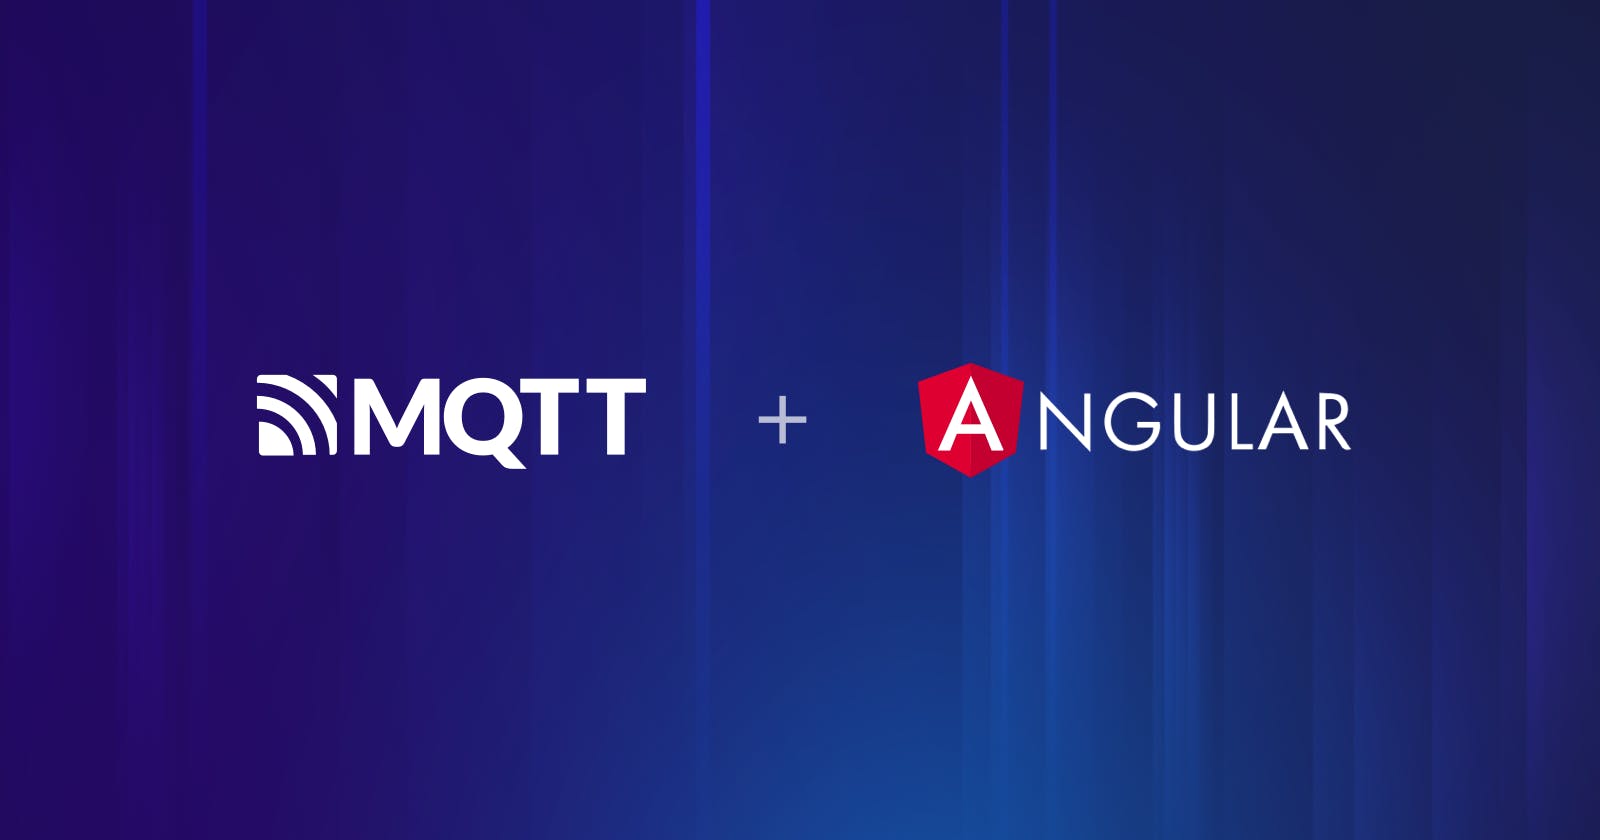 How to Use MQTT in The Angular Project